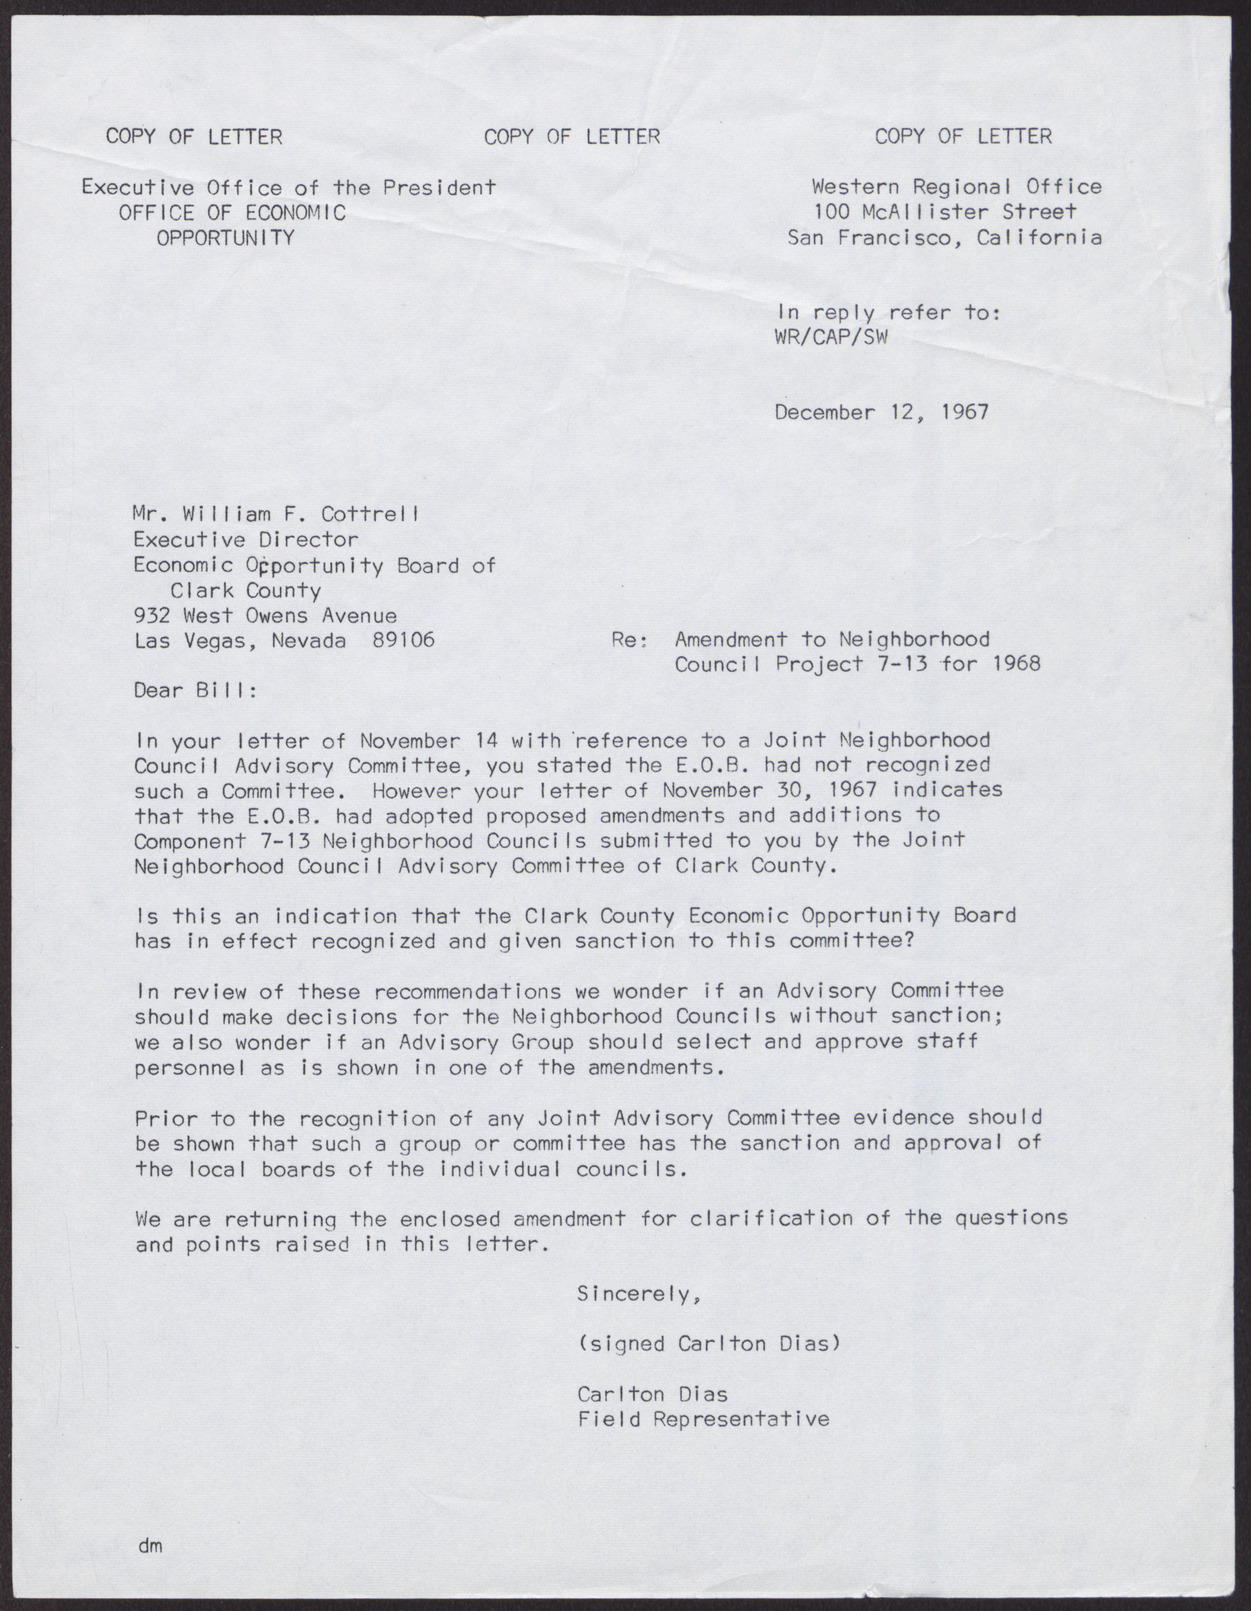 Letter to Mr. William F. Cottrell from Carlton Dias, December 12, 1967